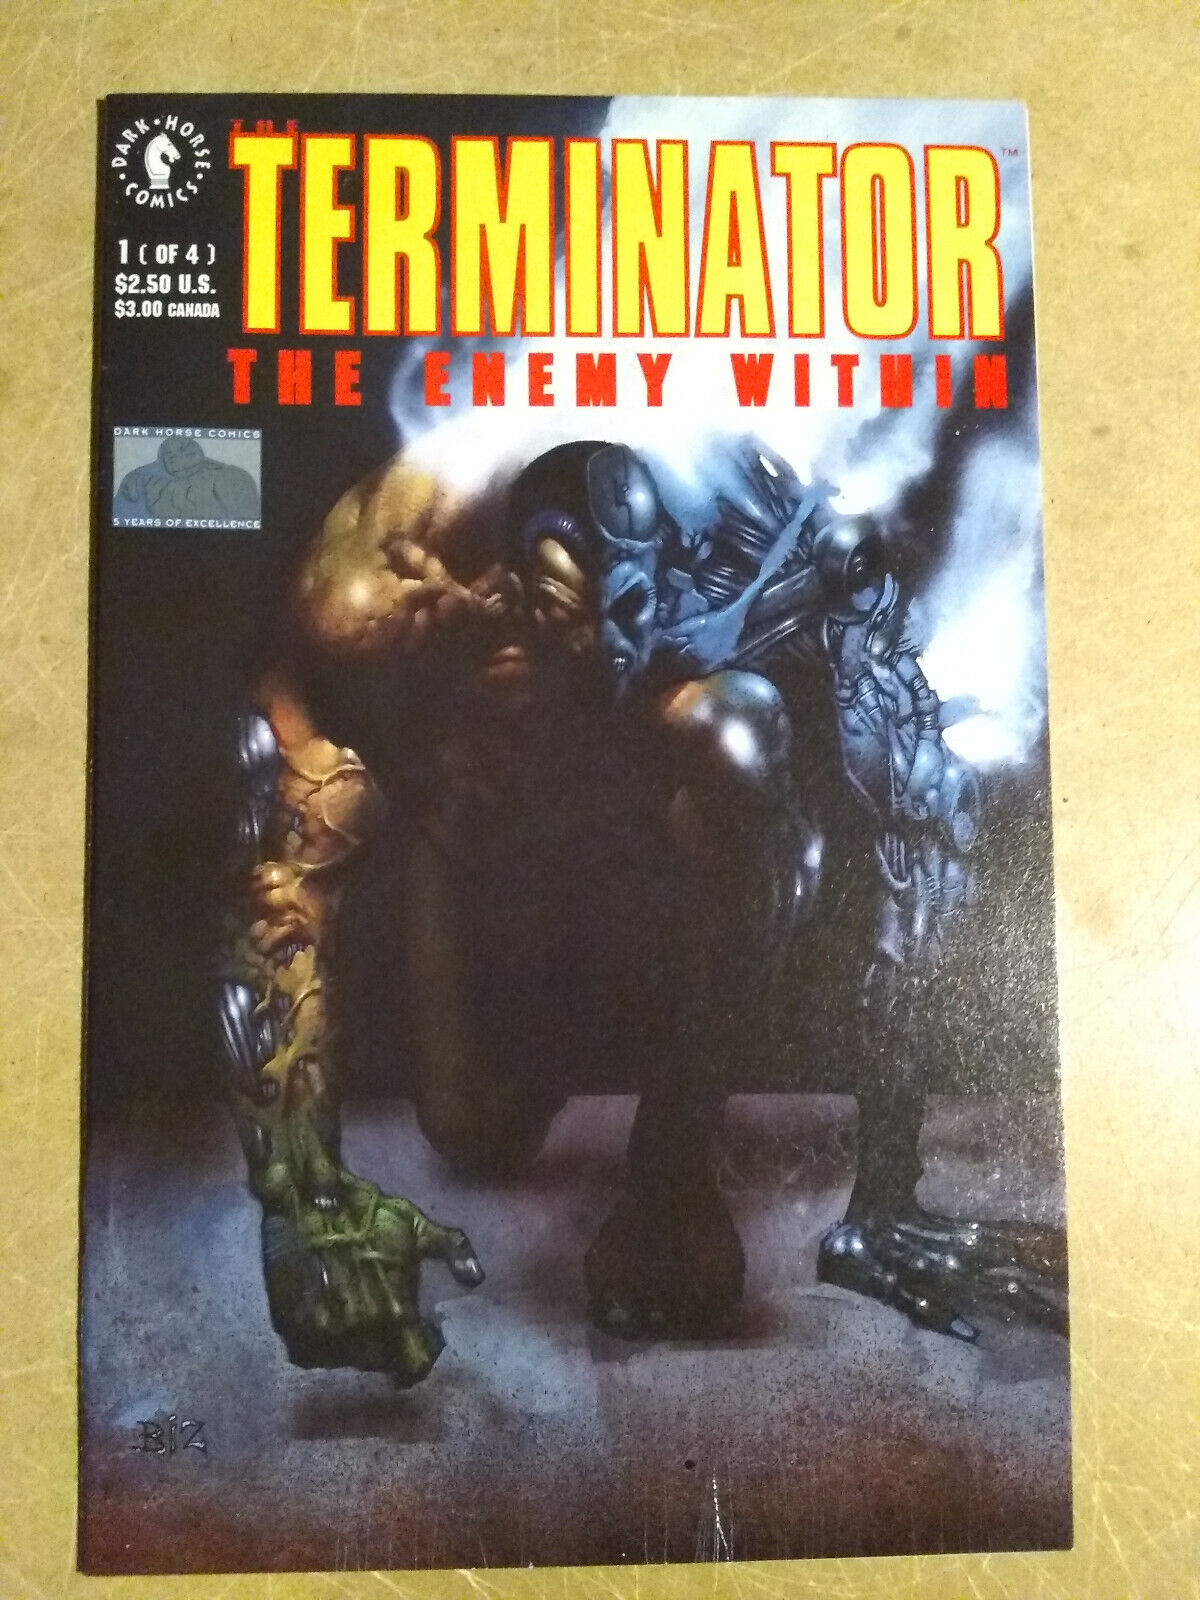 TERMINATOR THE ENEMY WITHIN #1 FIRST PRINT DARK HORSE COMICS (1991)